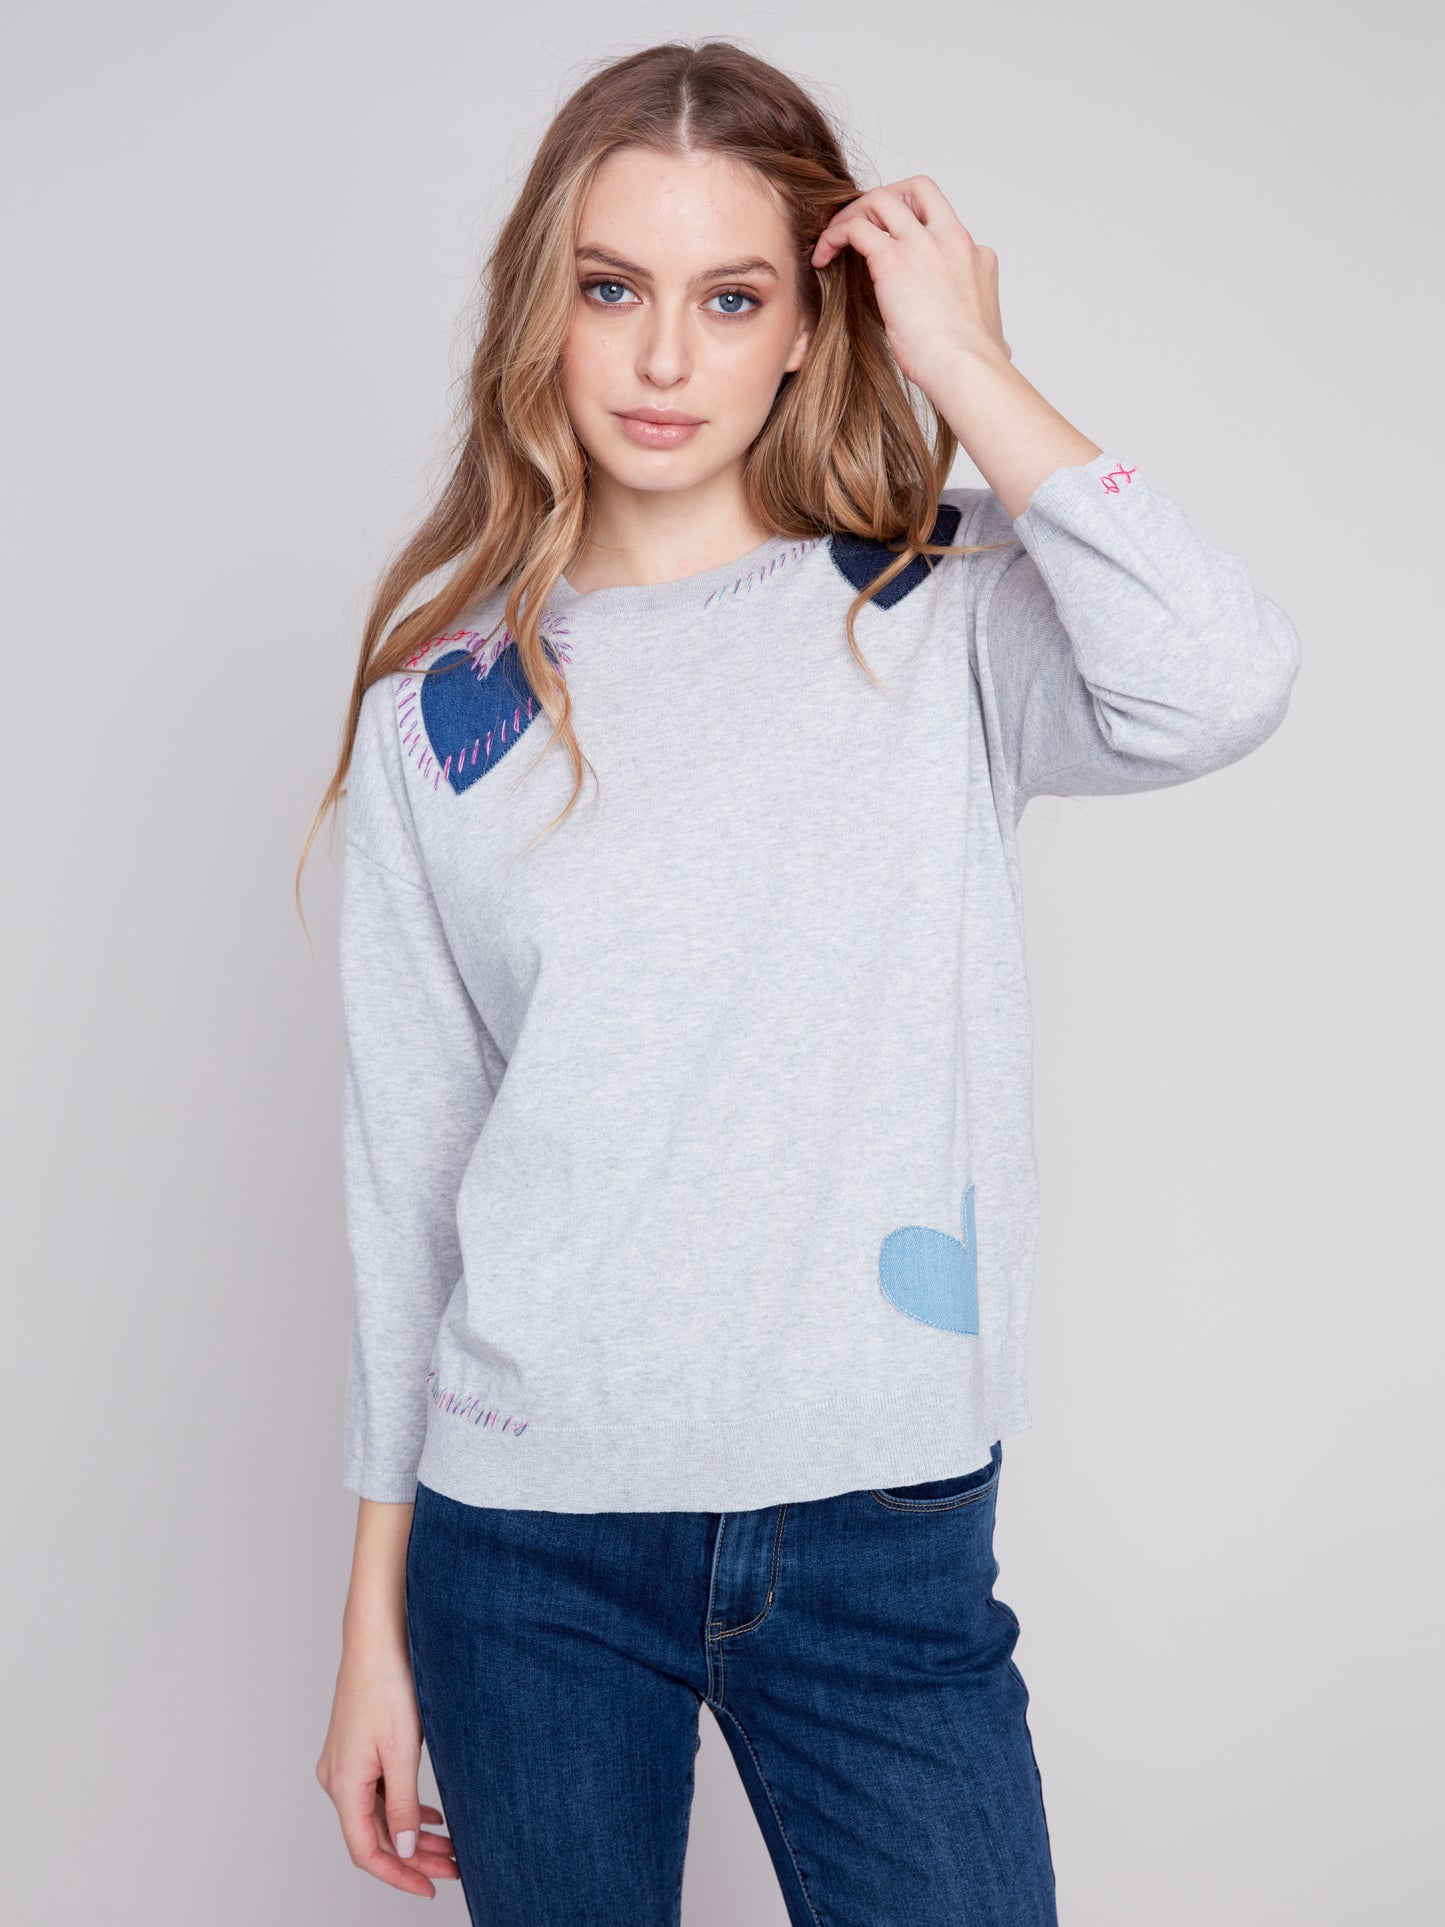 Charlie B 3/4 Sleeve Sweater w/Heart Patches H. Grey C2643-261B-P008